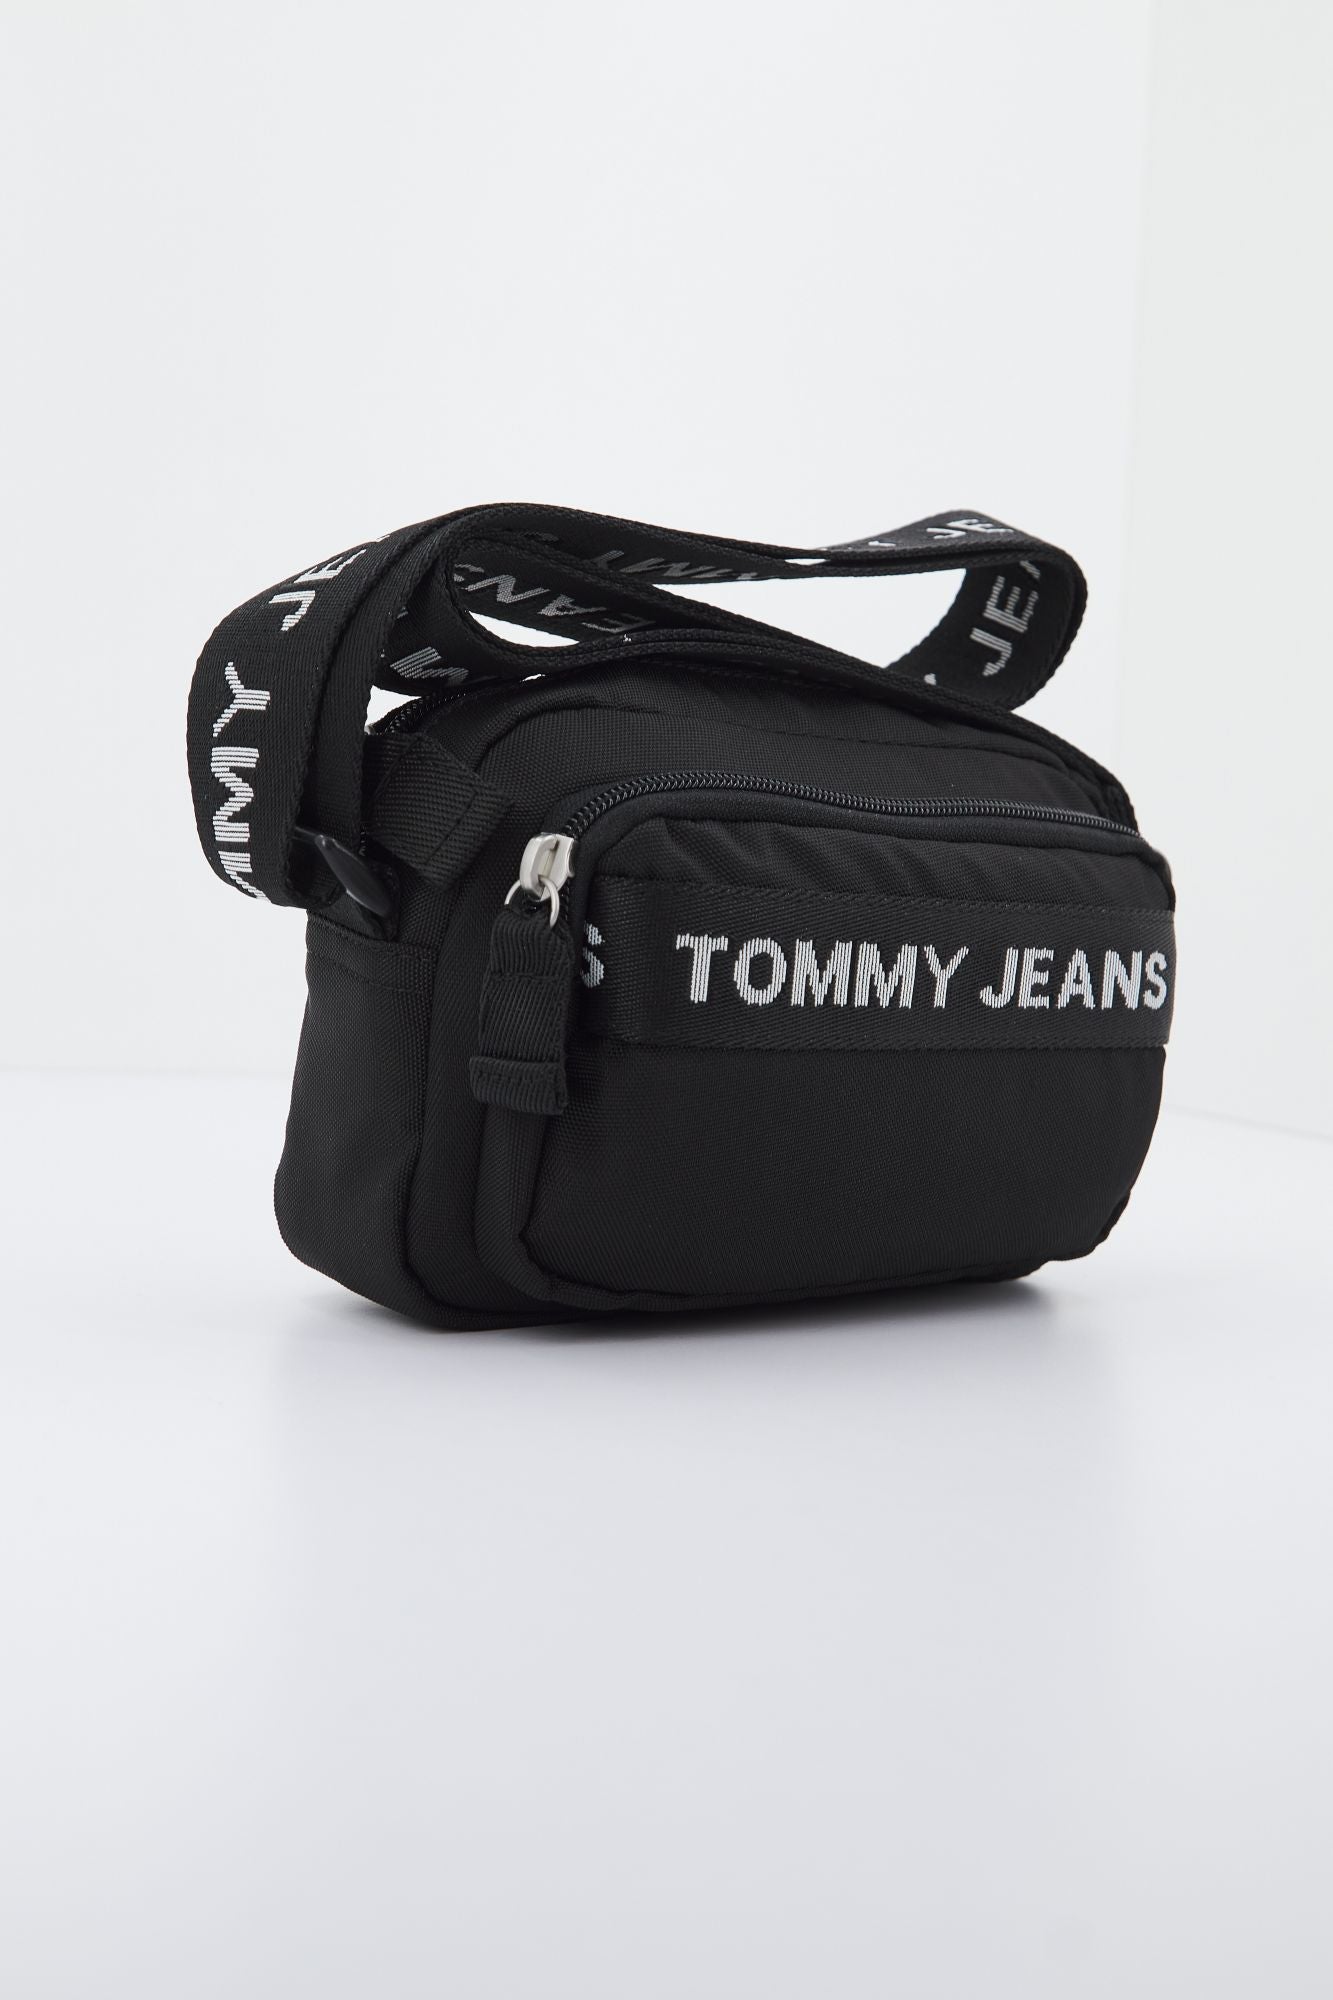 TOMMY JEANS ESSENTIAL CROSSOVER en color NEGRO (3)